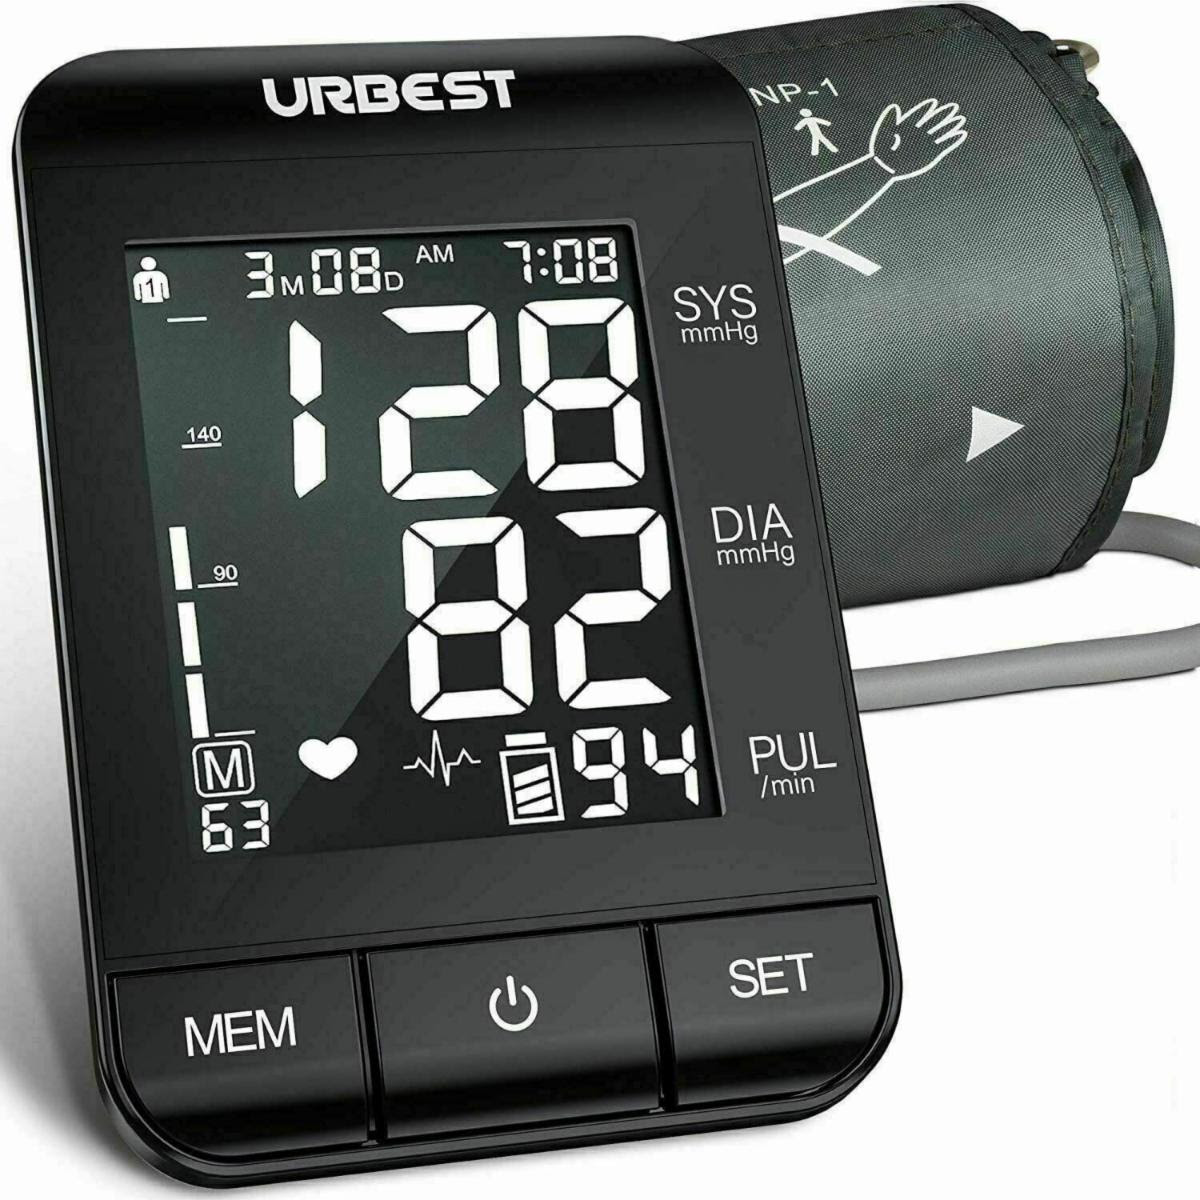 URBEST Upper Arm Blood Pressure Monitor Portable LED Display Pulse Test BP Cuff - Available